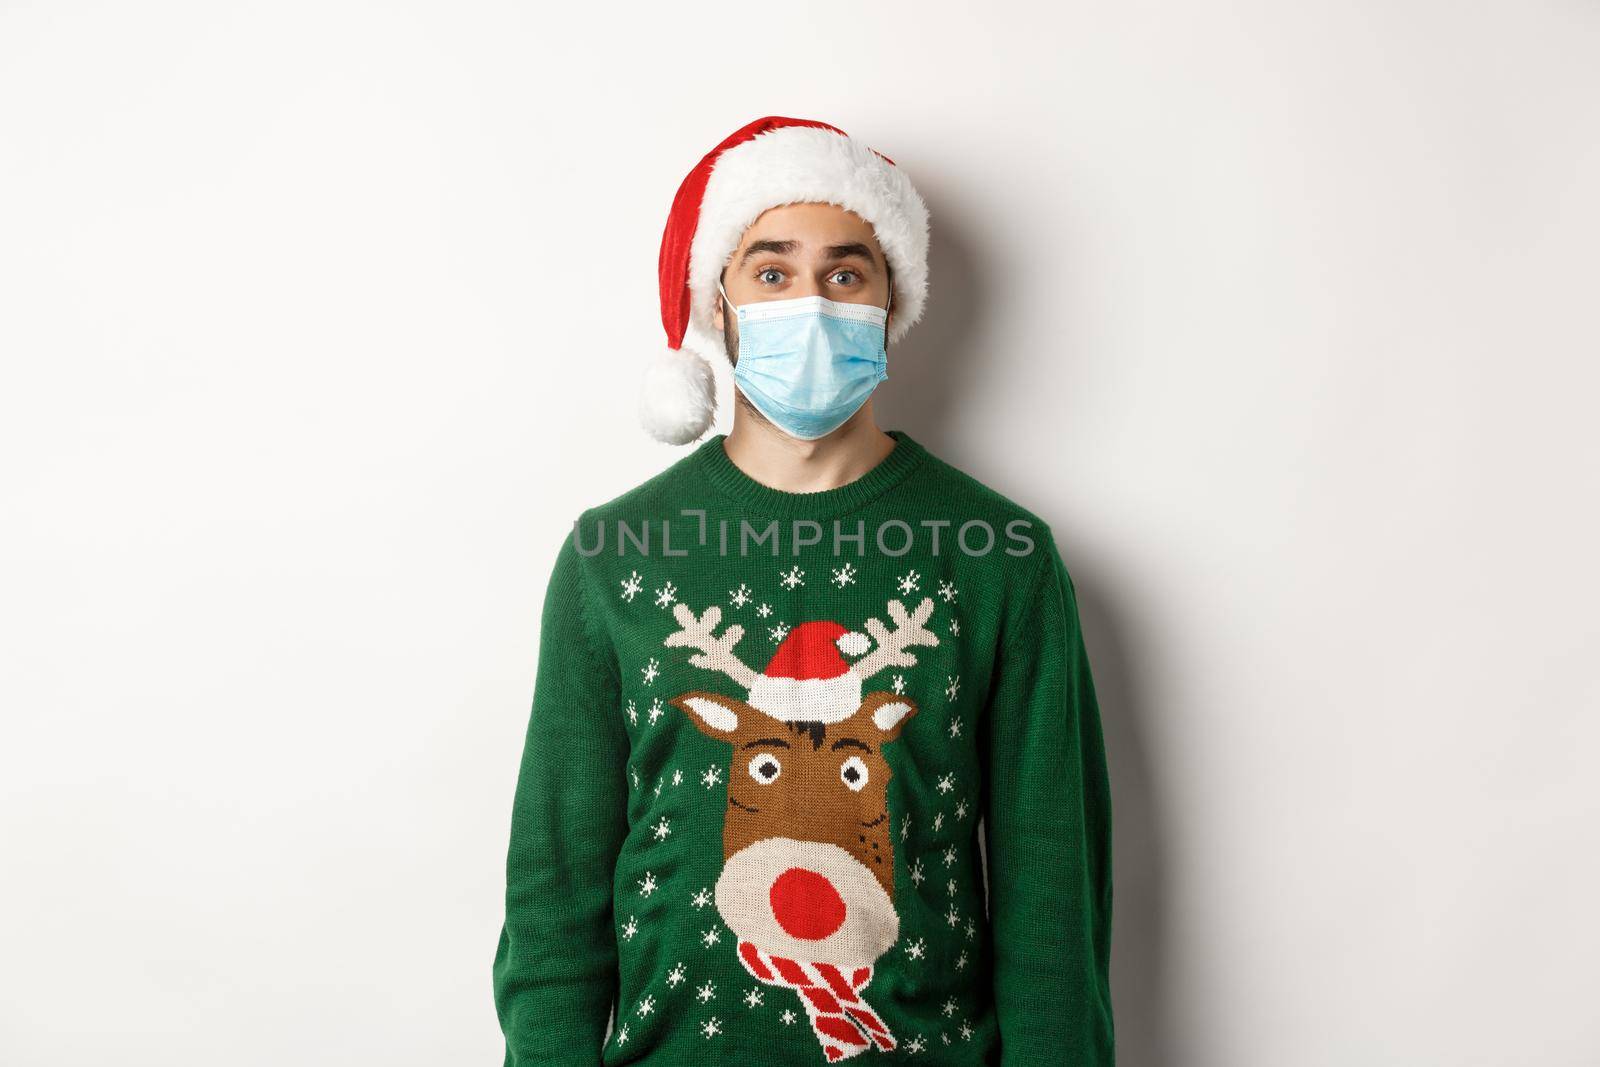 Christmas during pandemic, covid-19 concept. Young man in Santa hat and face mask celebrating New Year party with preventive measures, white background.